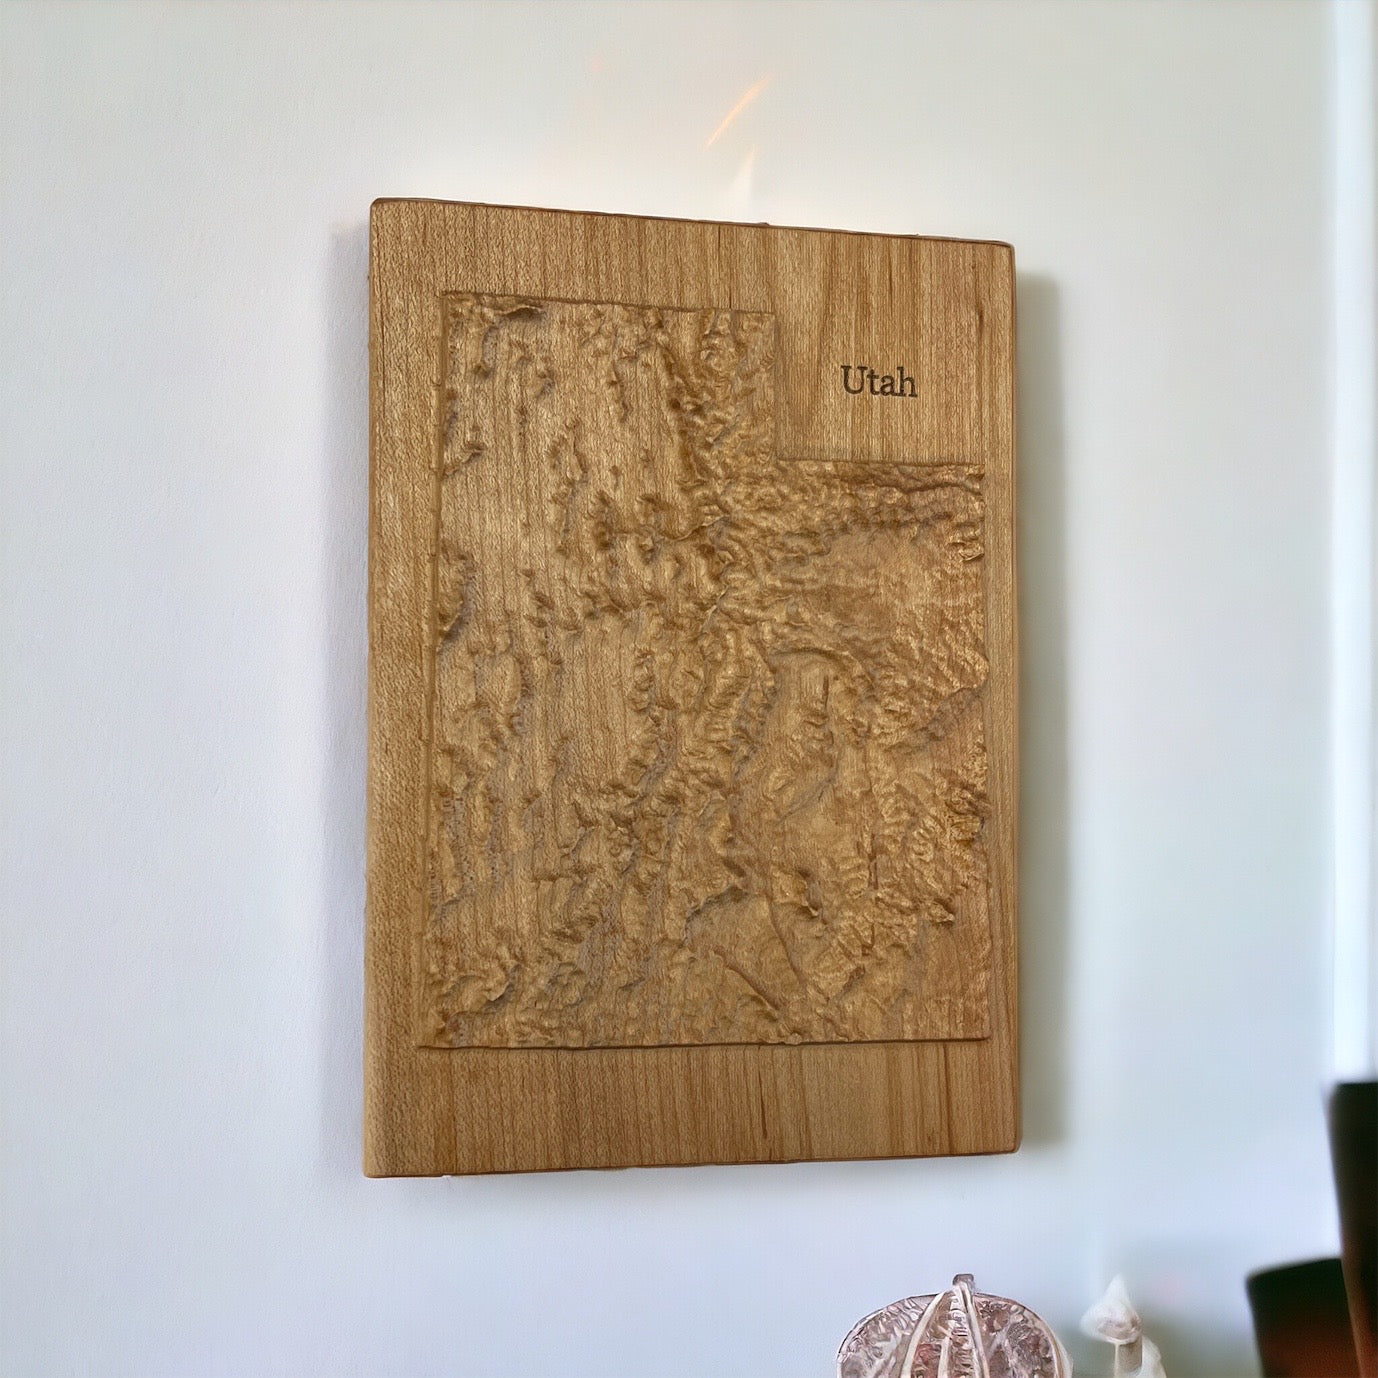 Utah Map | Wood Carved Relief Map | 3D Topographic Wooden Map | Unique Wedding Anniversary Birthday Housewarming Gift | Utah Gift